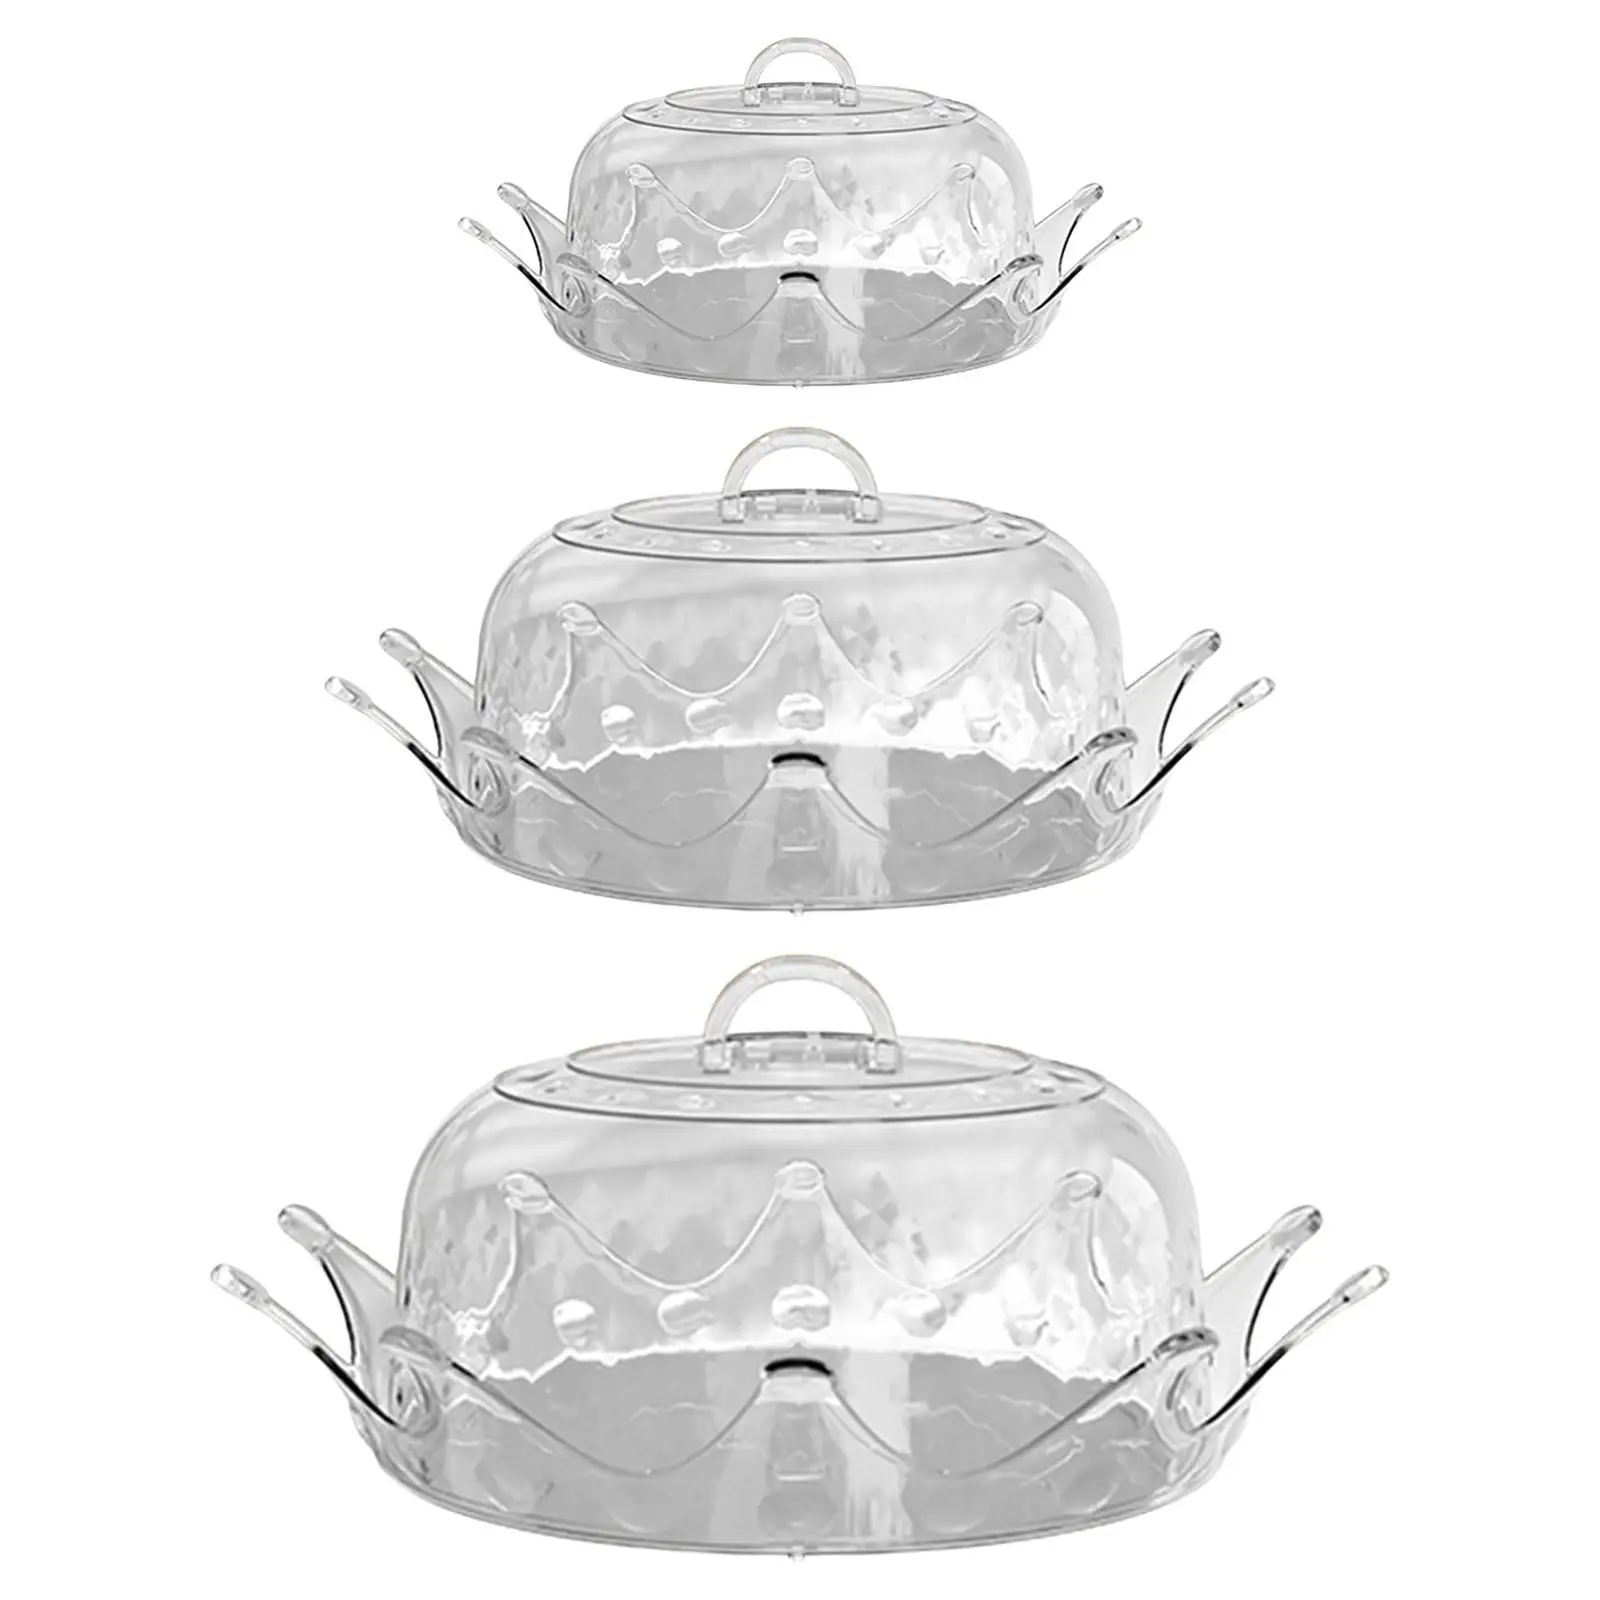 Reusable Serving Plate Platter with Dome Cover Shatterproof Round Clear Cake Plate Server Display for Cake Salad Entertaining